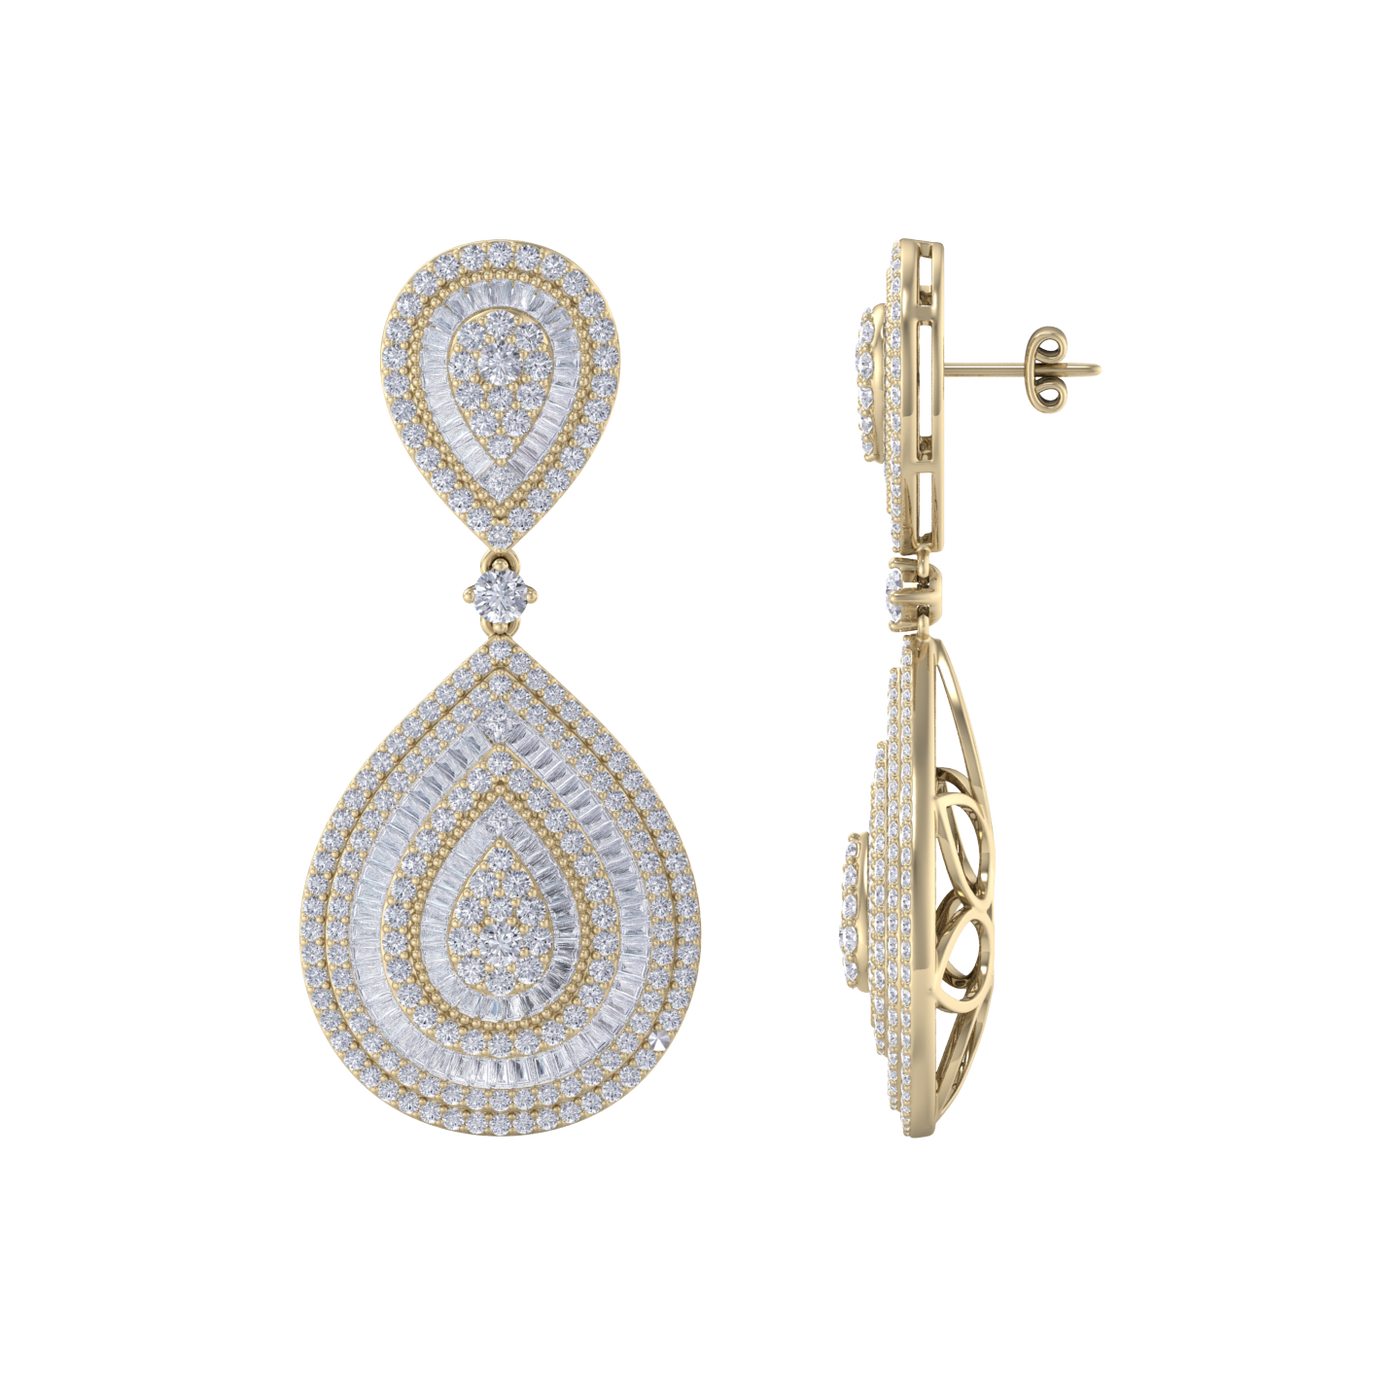 Diamond chandelier earrings in yellow gold with white diamonds of 8.15 ct in weight